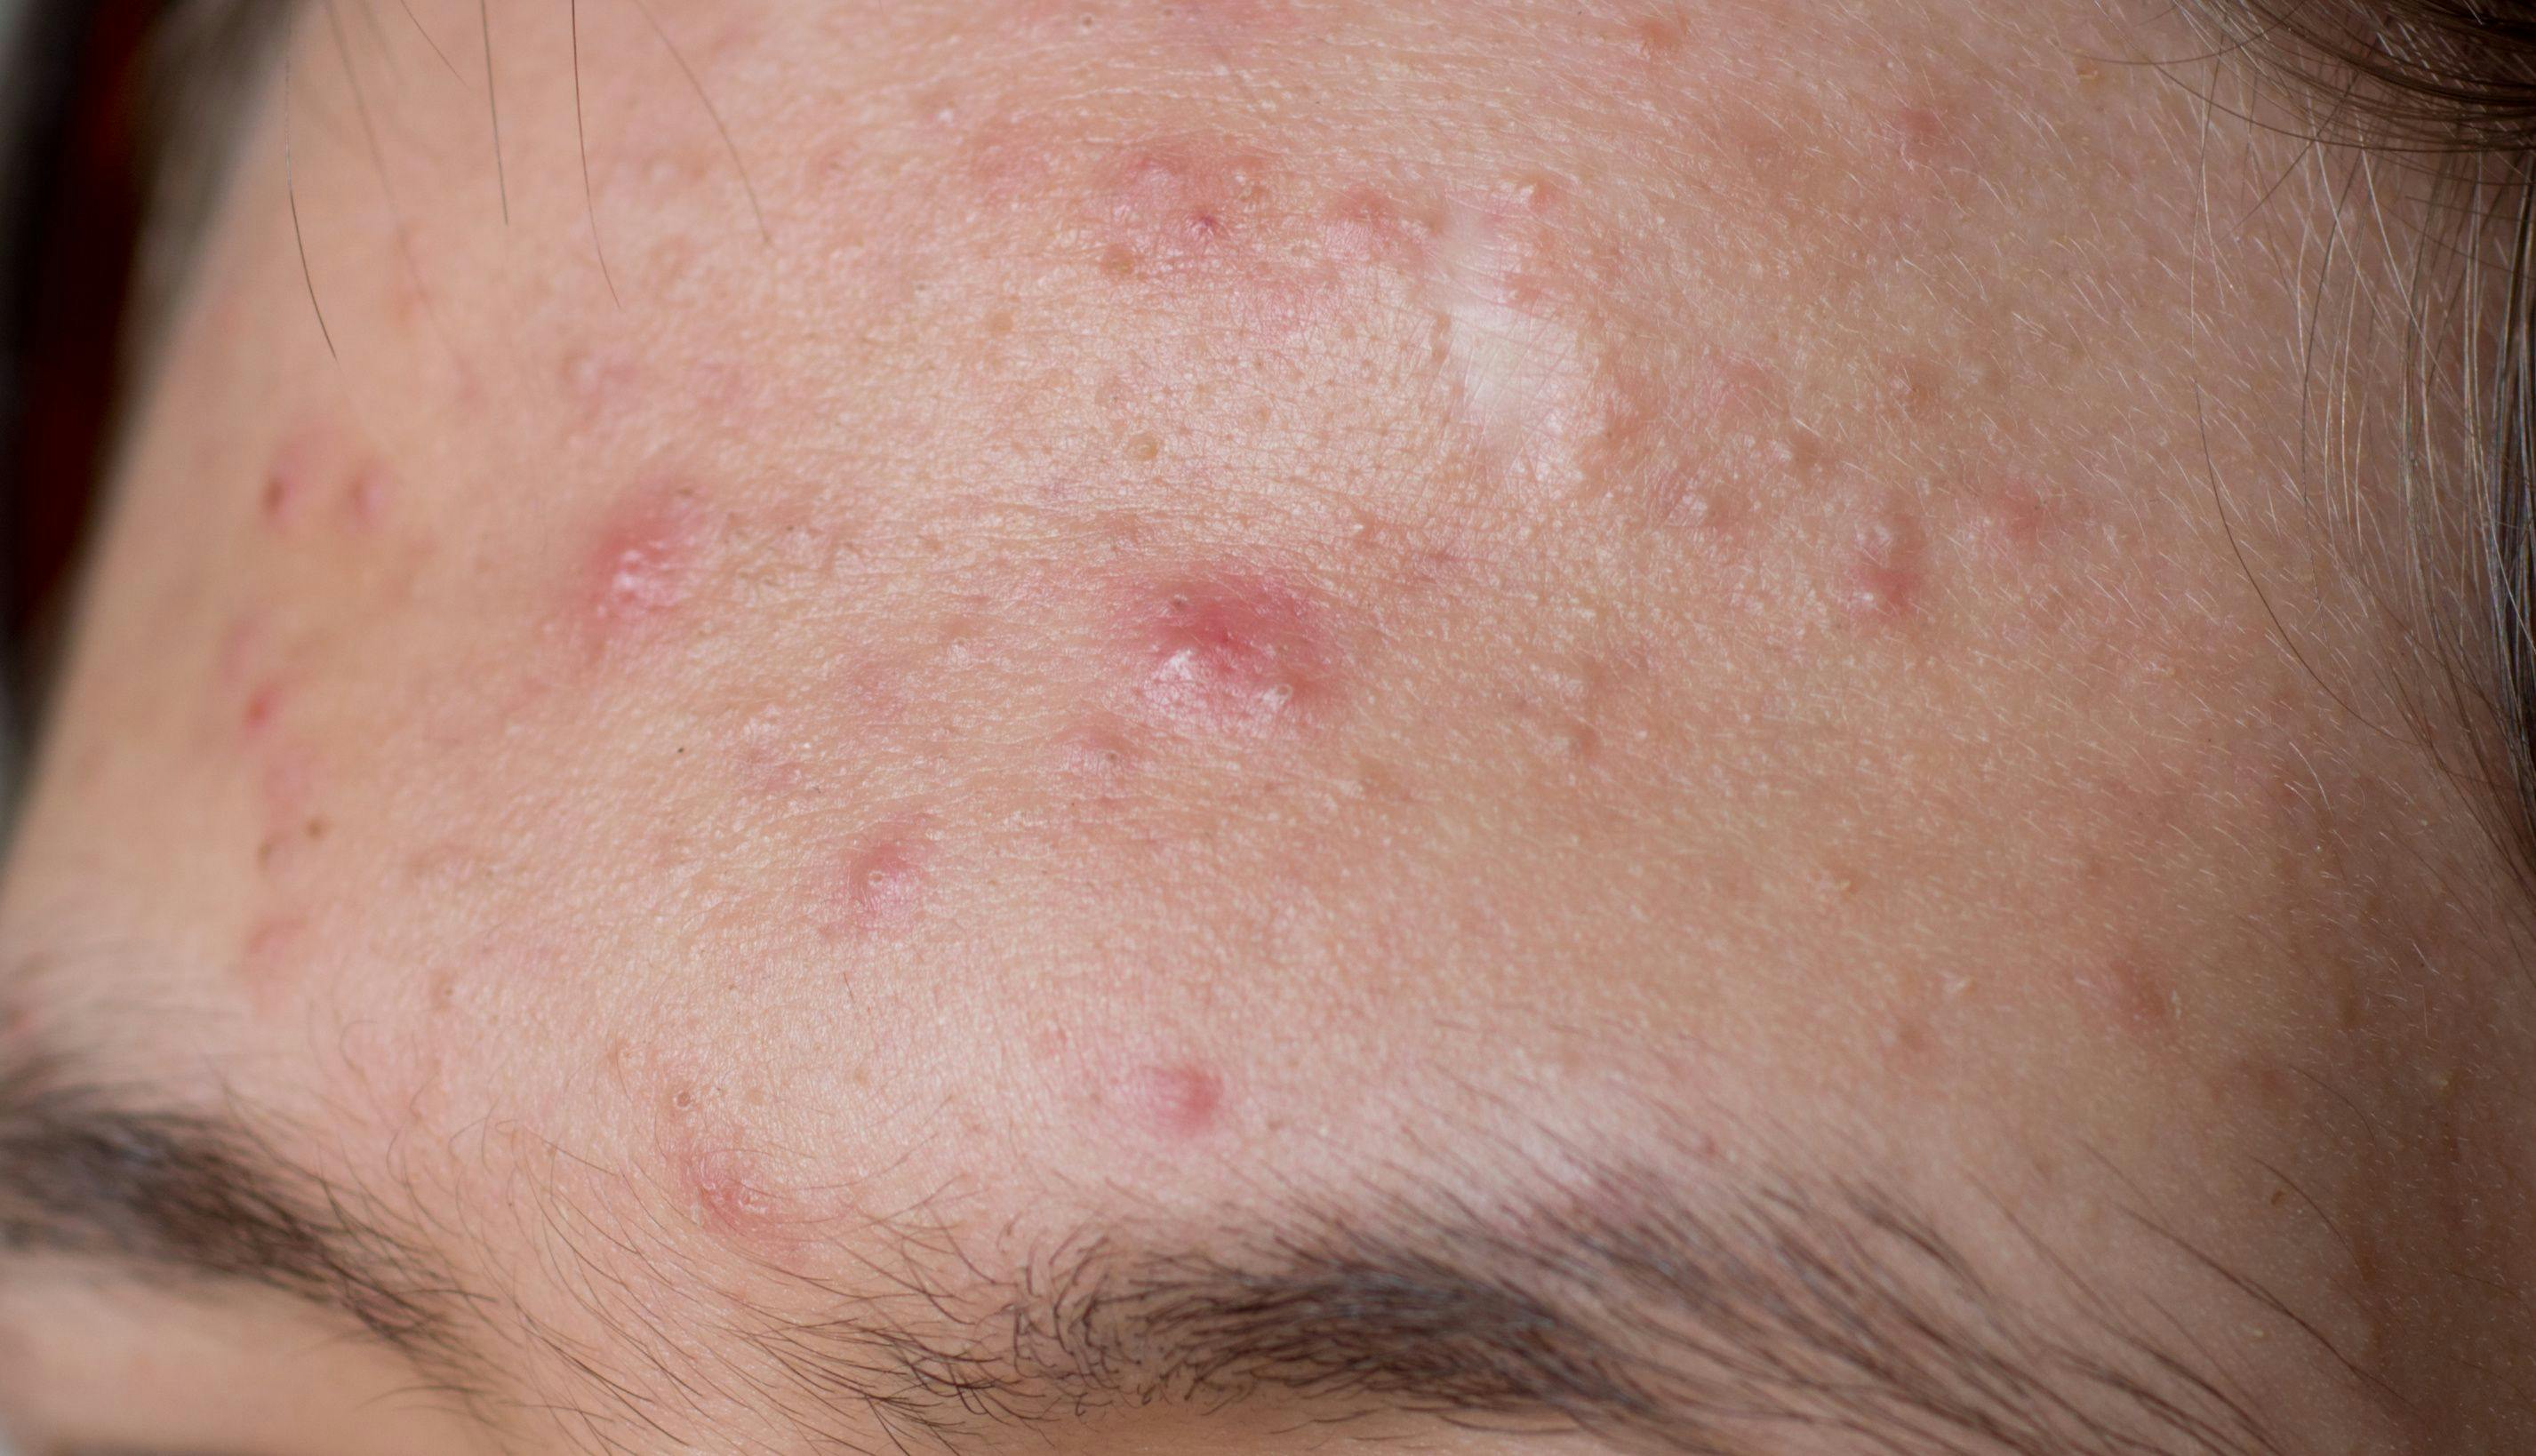 Novel Triple-Combination Acne Treatment Shows Early, Significant Results 